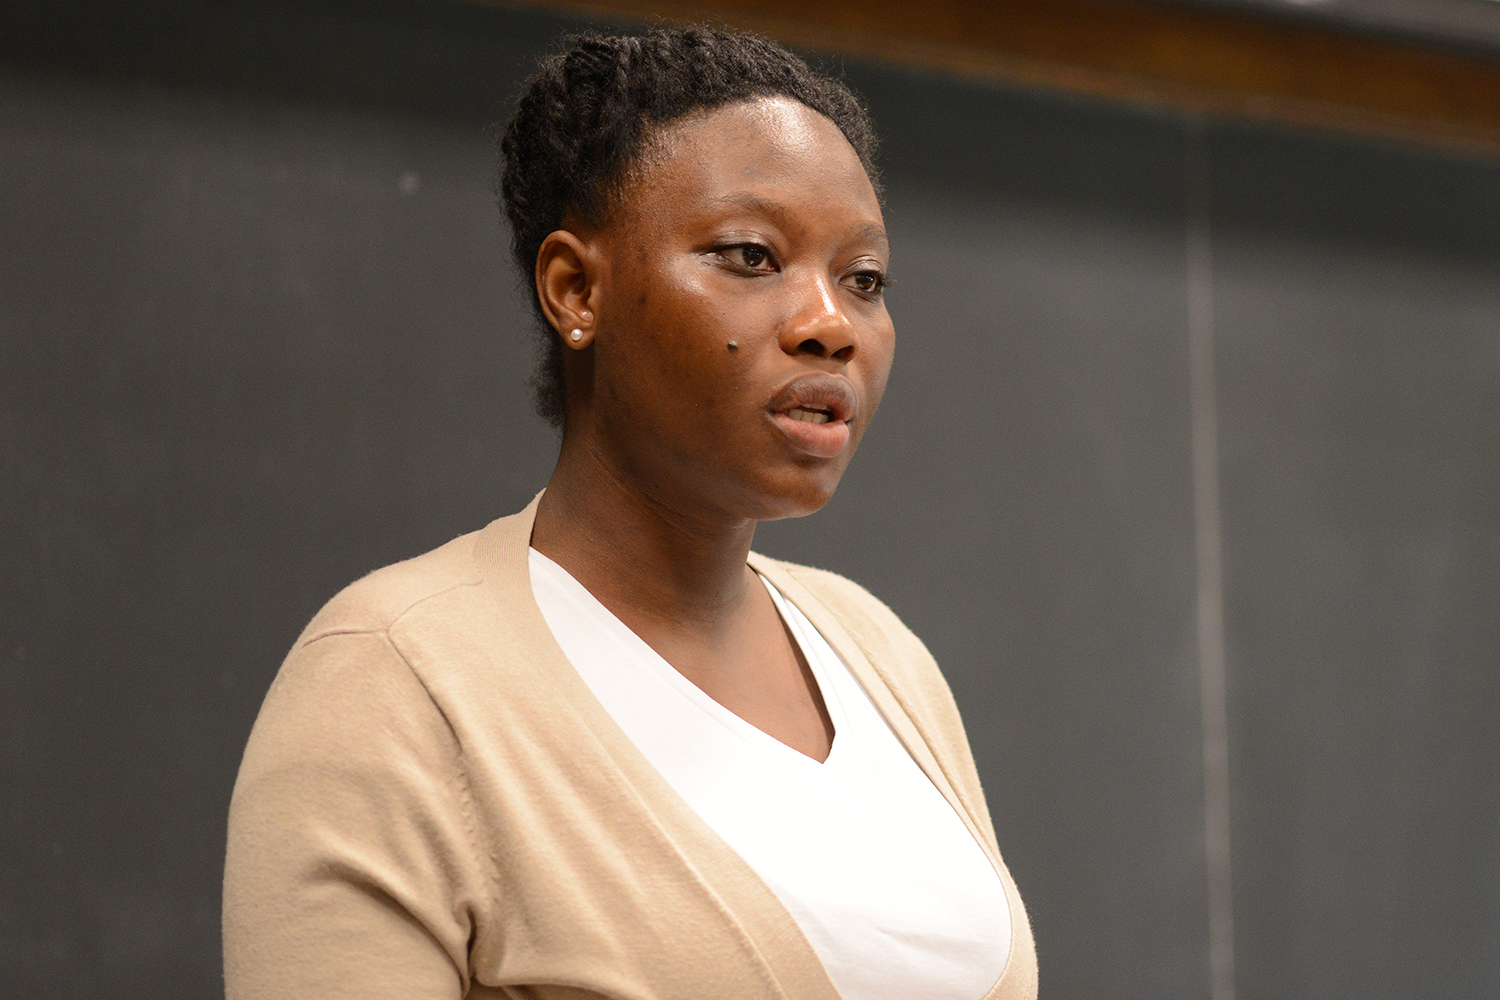 Queens College student Giovannah Phillipeaux presented “Black Lives Matter: An Exploration of Self.”